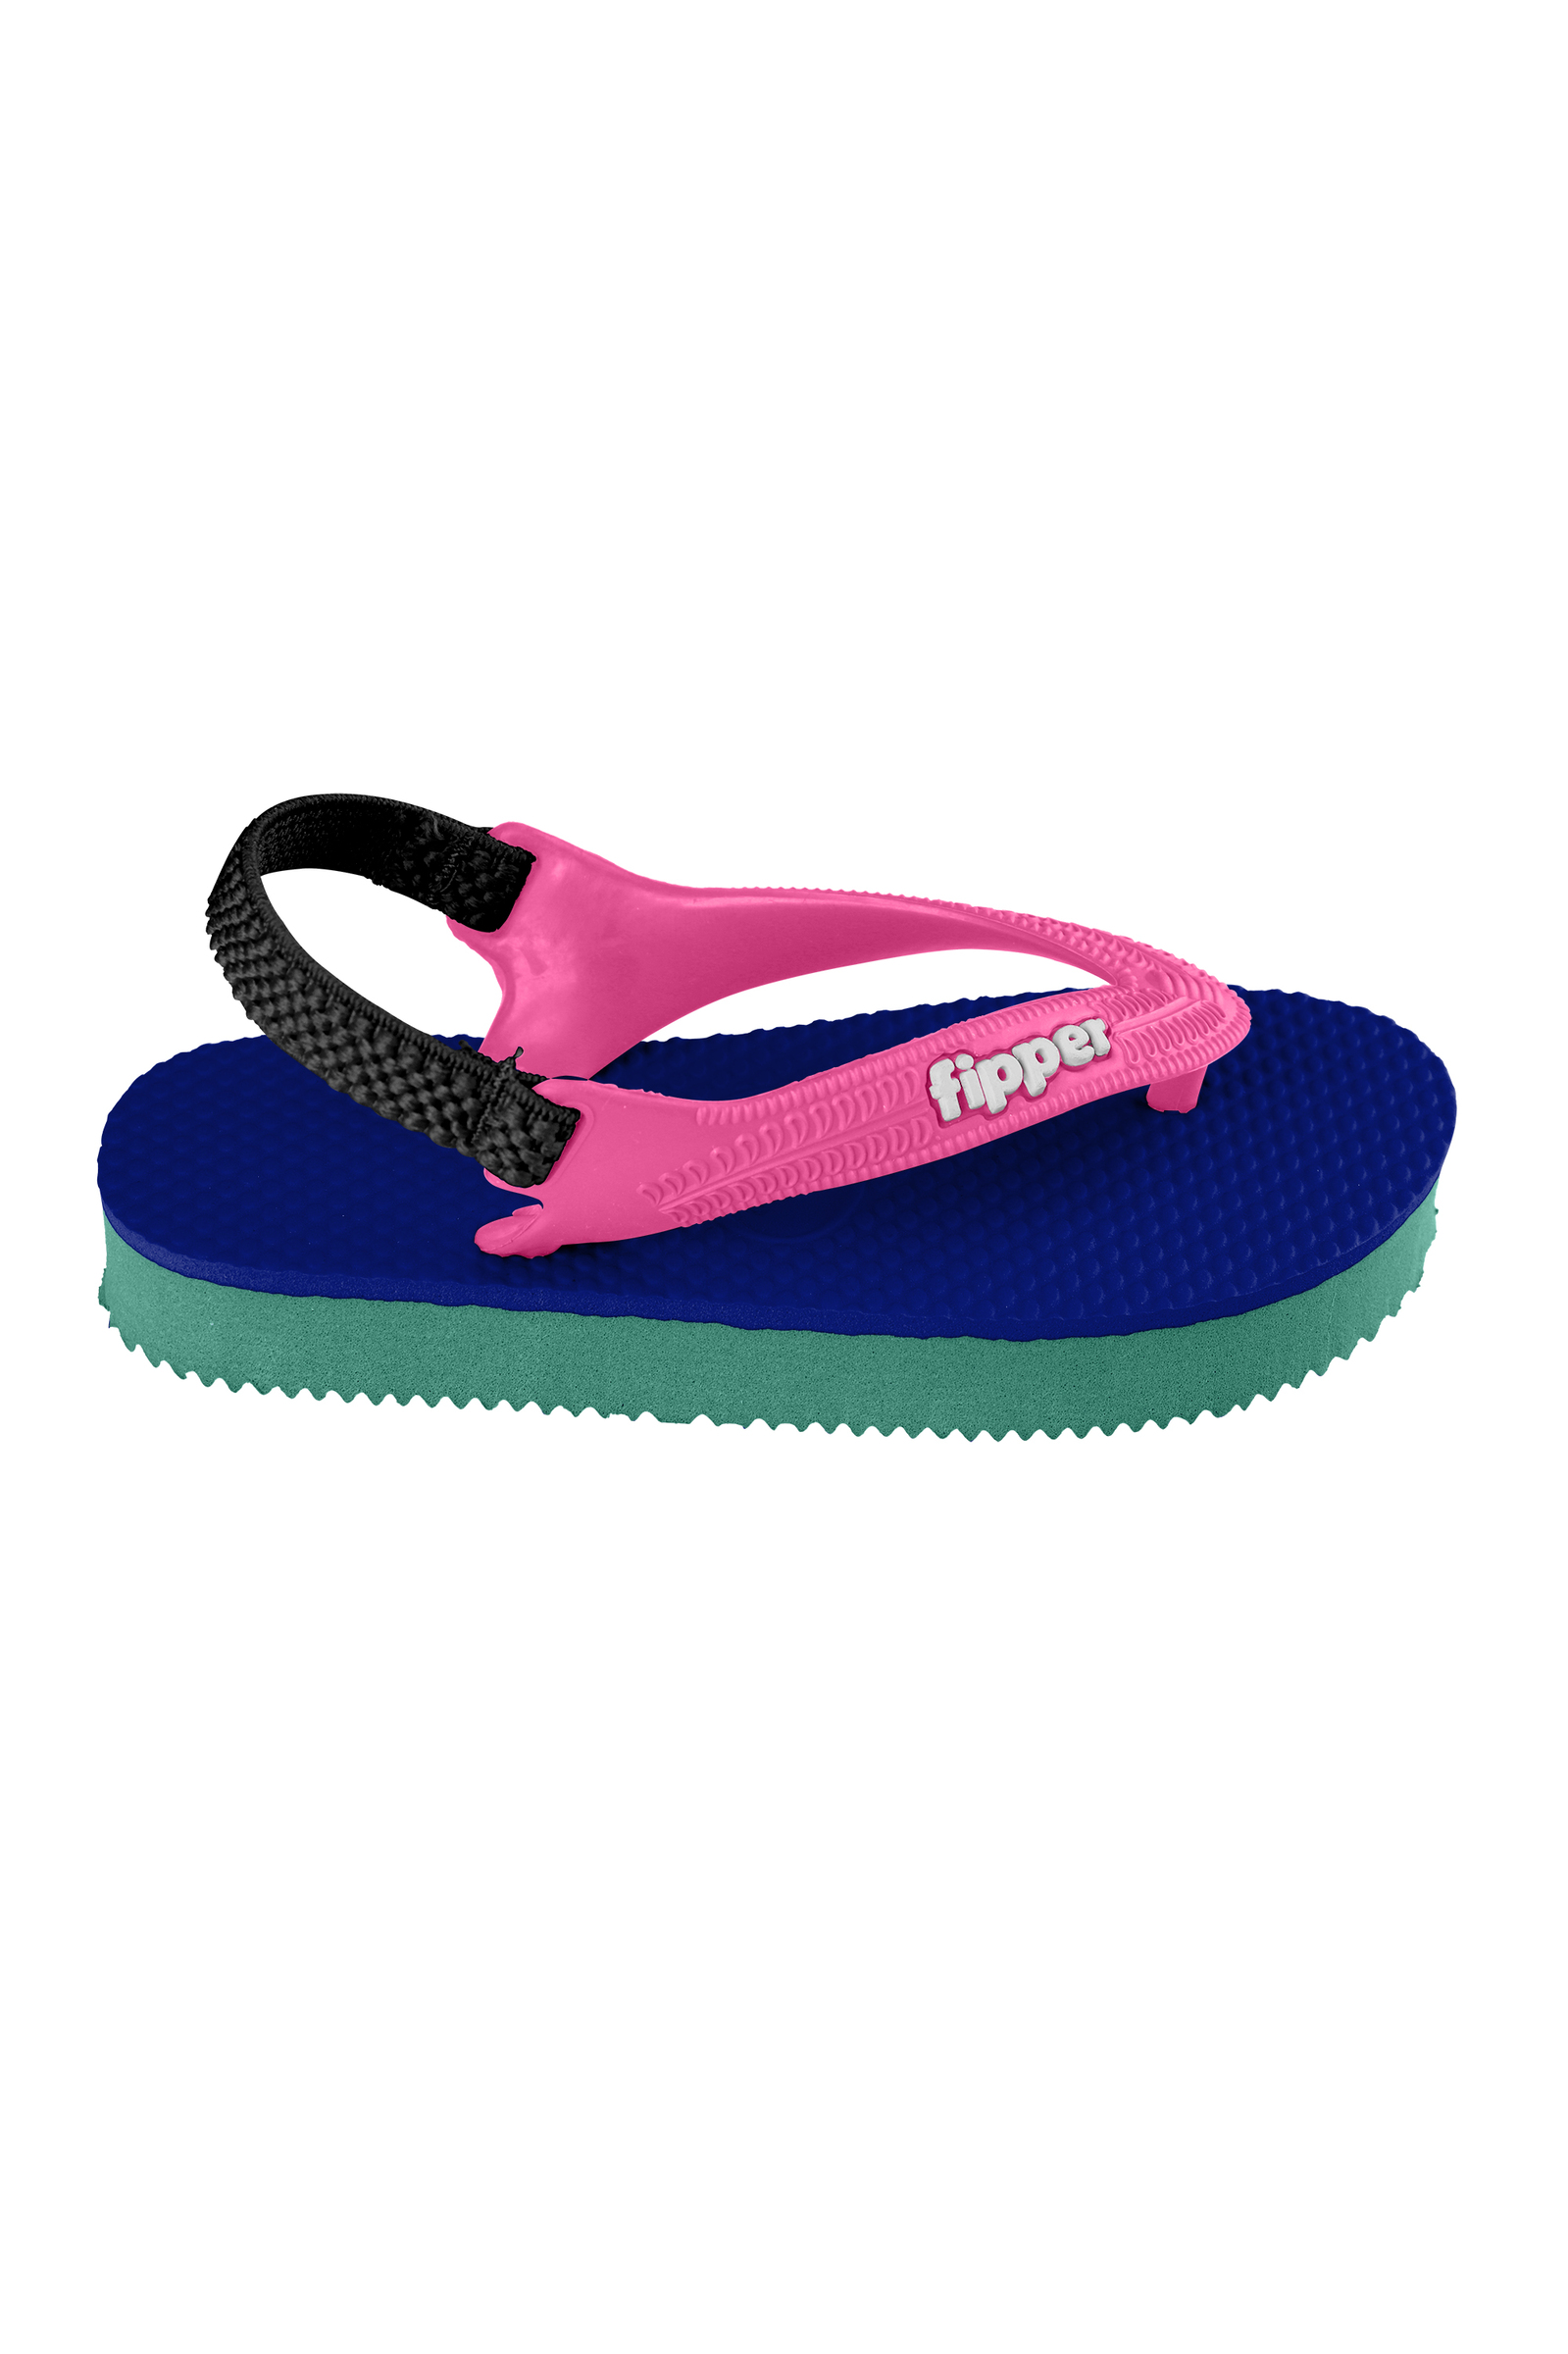 Fipper Todd's Rubber for Toddler in Navy / Green (Holiday) / Pink